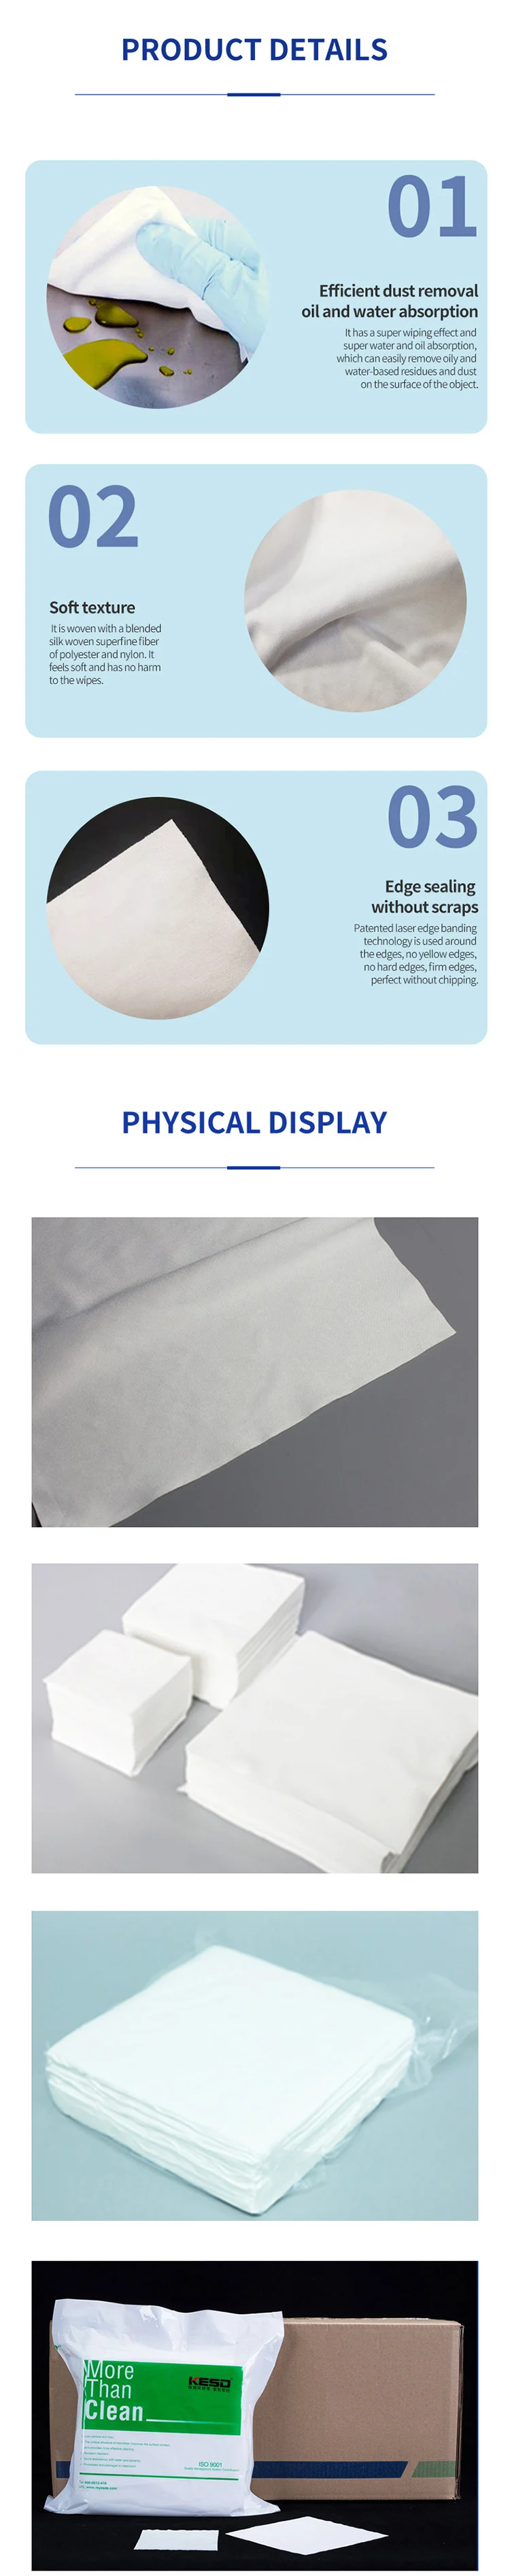 10x10cm 180g Class 4 Lint Free Camera Lens Non-dust High Density Microfiber Cleanroom Wiper For Iphone Lcd Screen